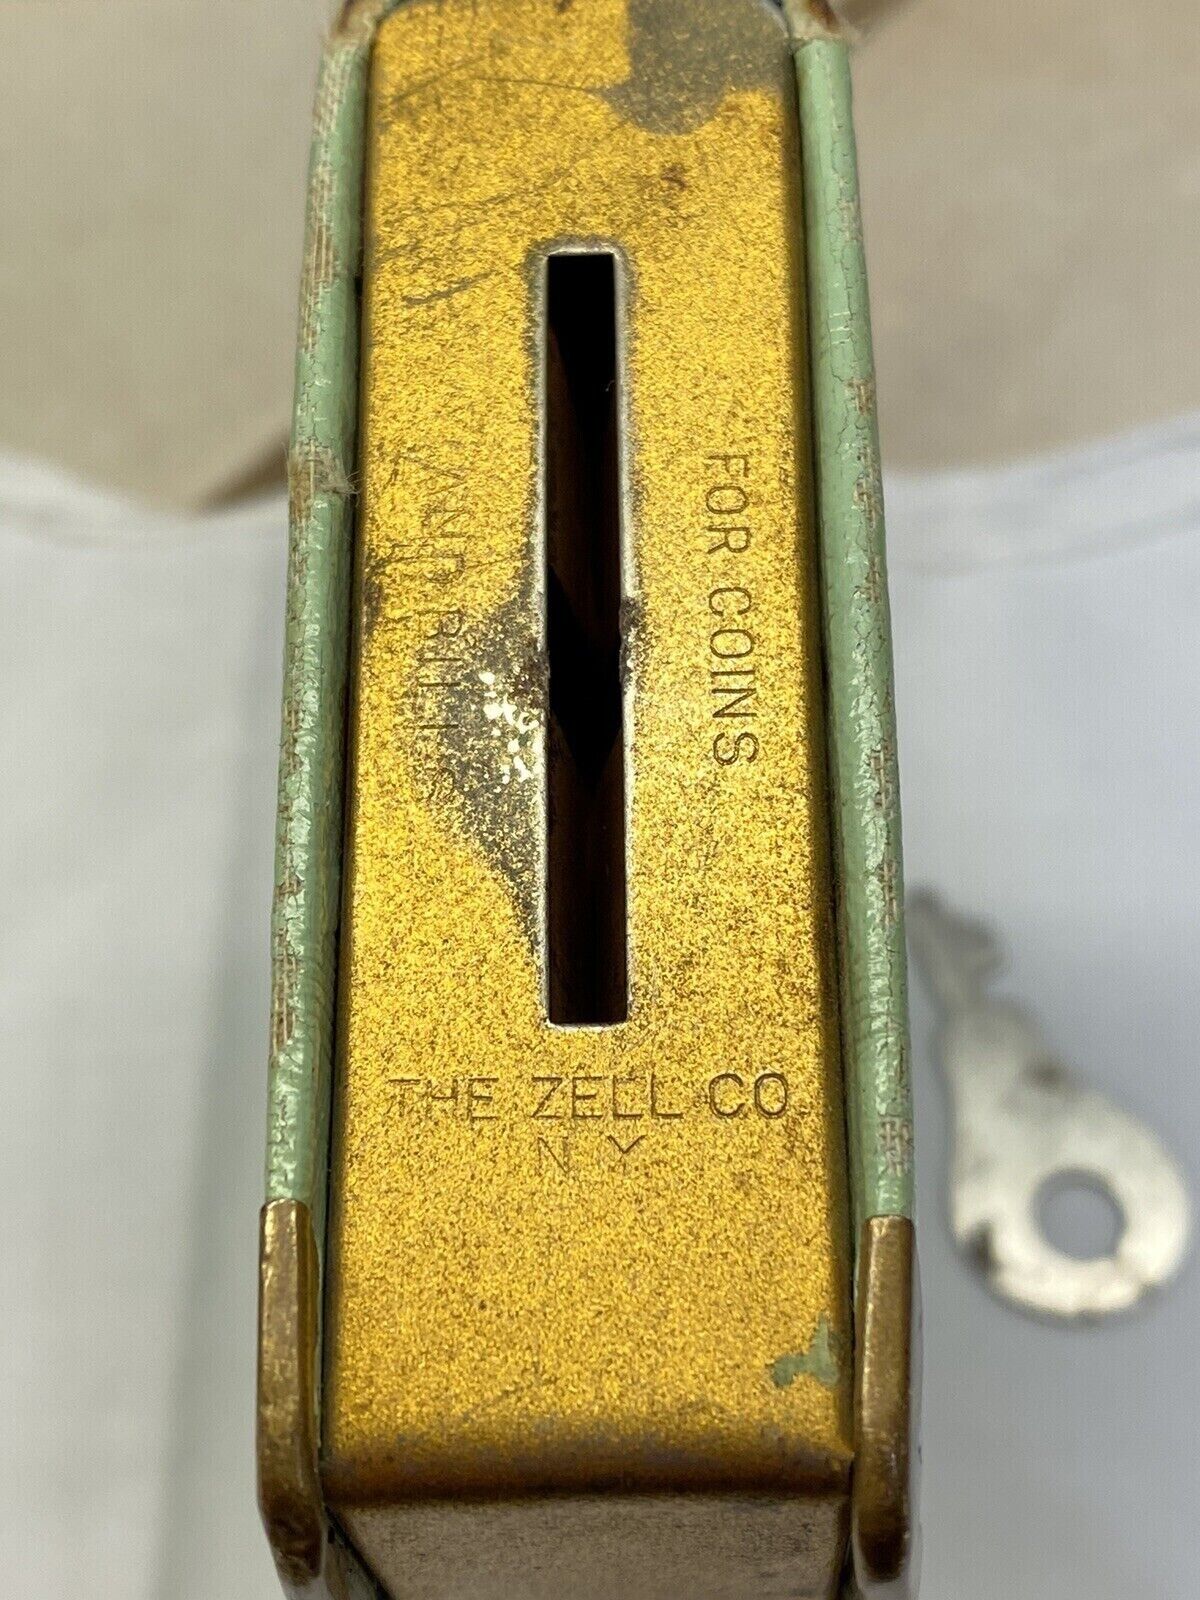 Replica REPLACEMENT KEY for ZELL Book Banks - Made in USA - FREE GIFT Rockymart - фотография #6